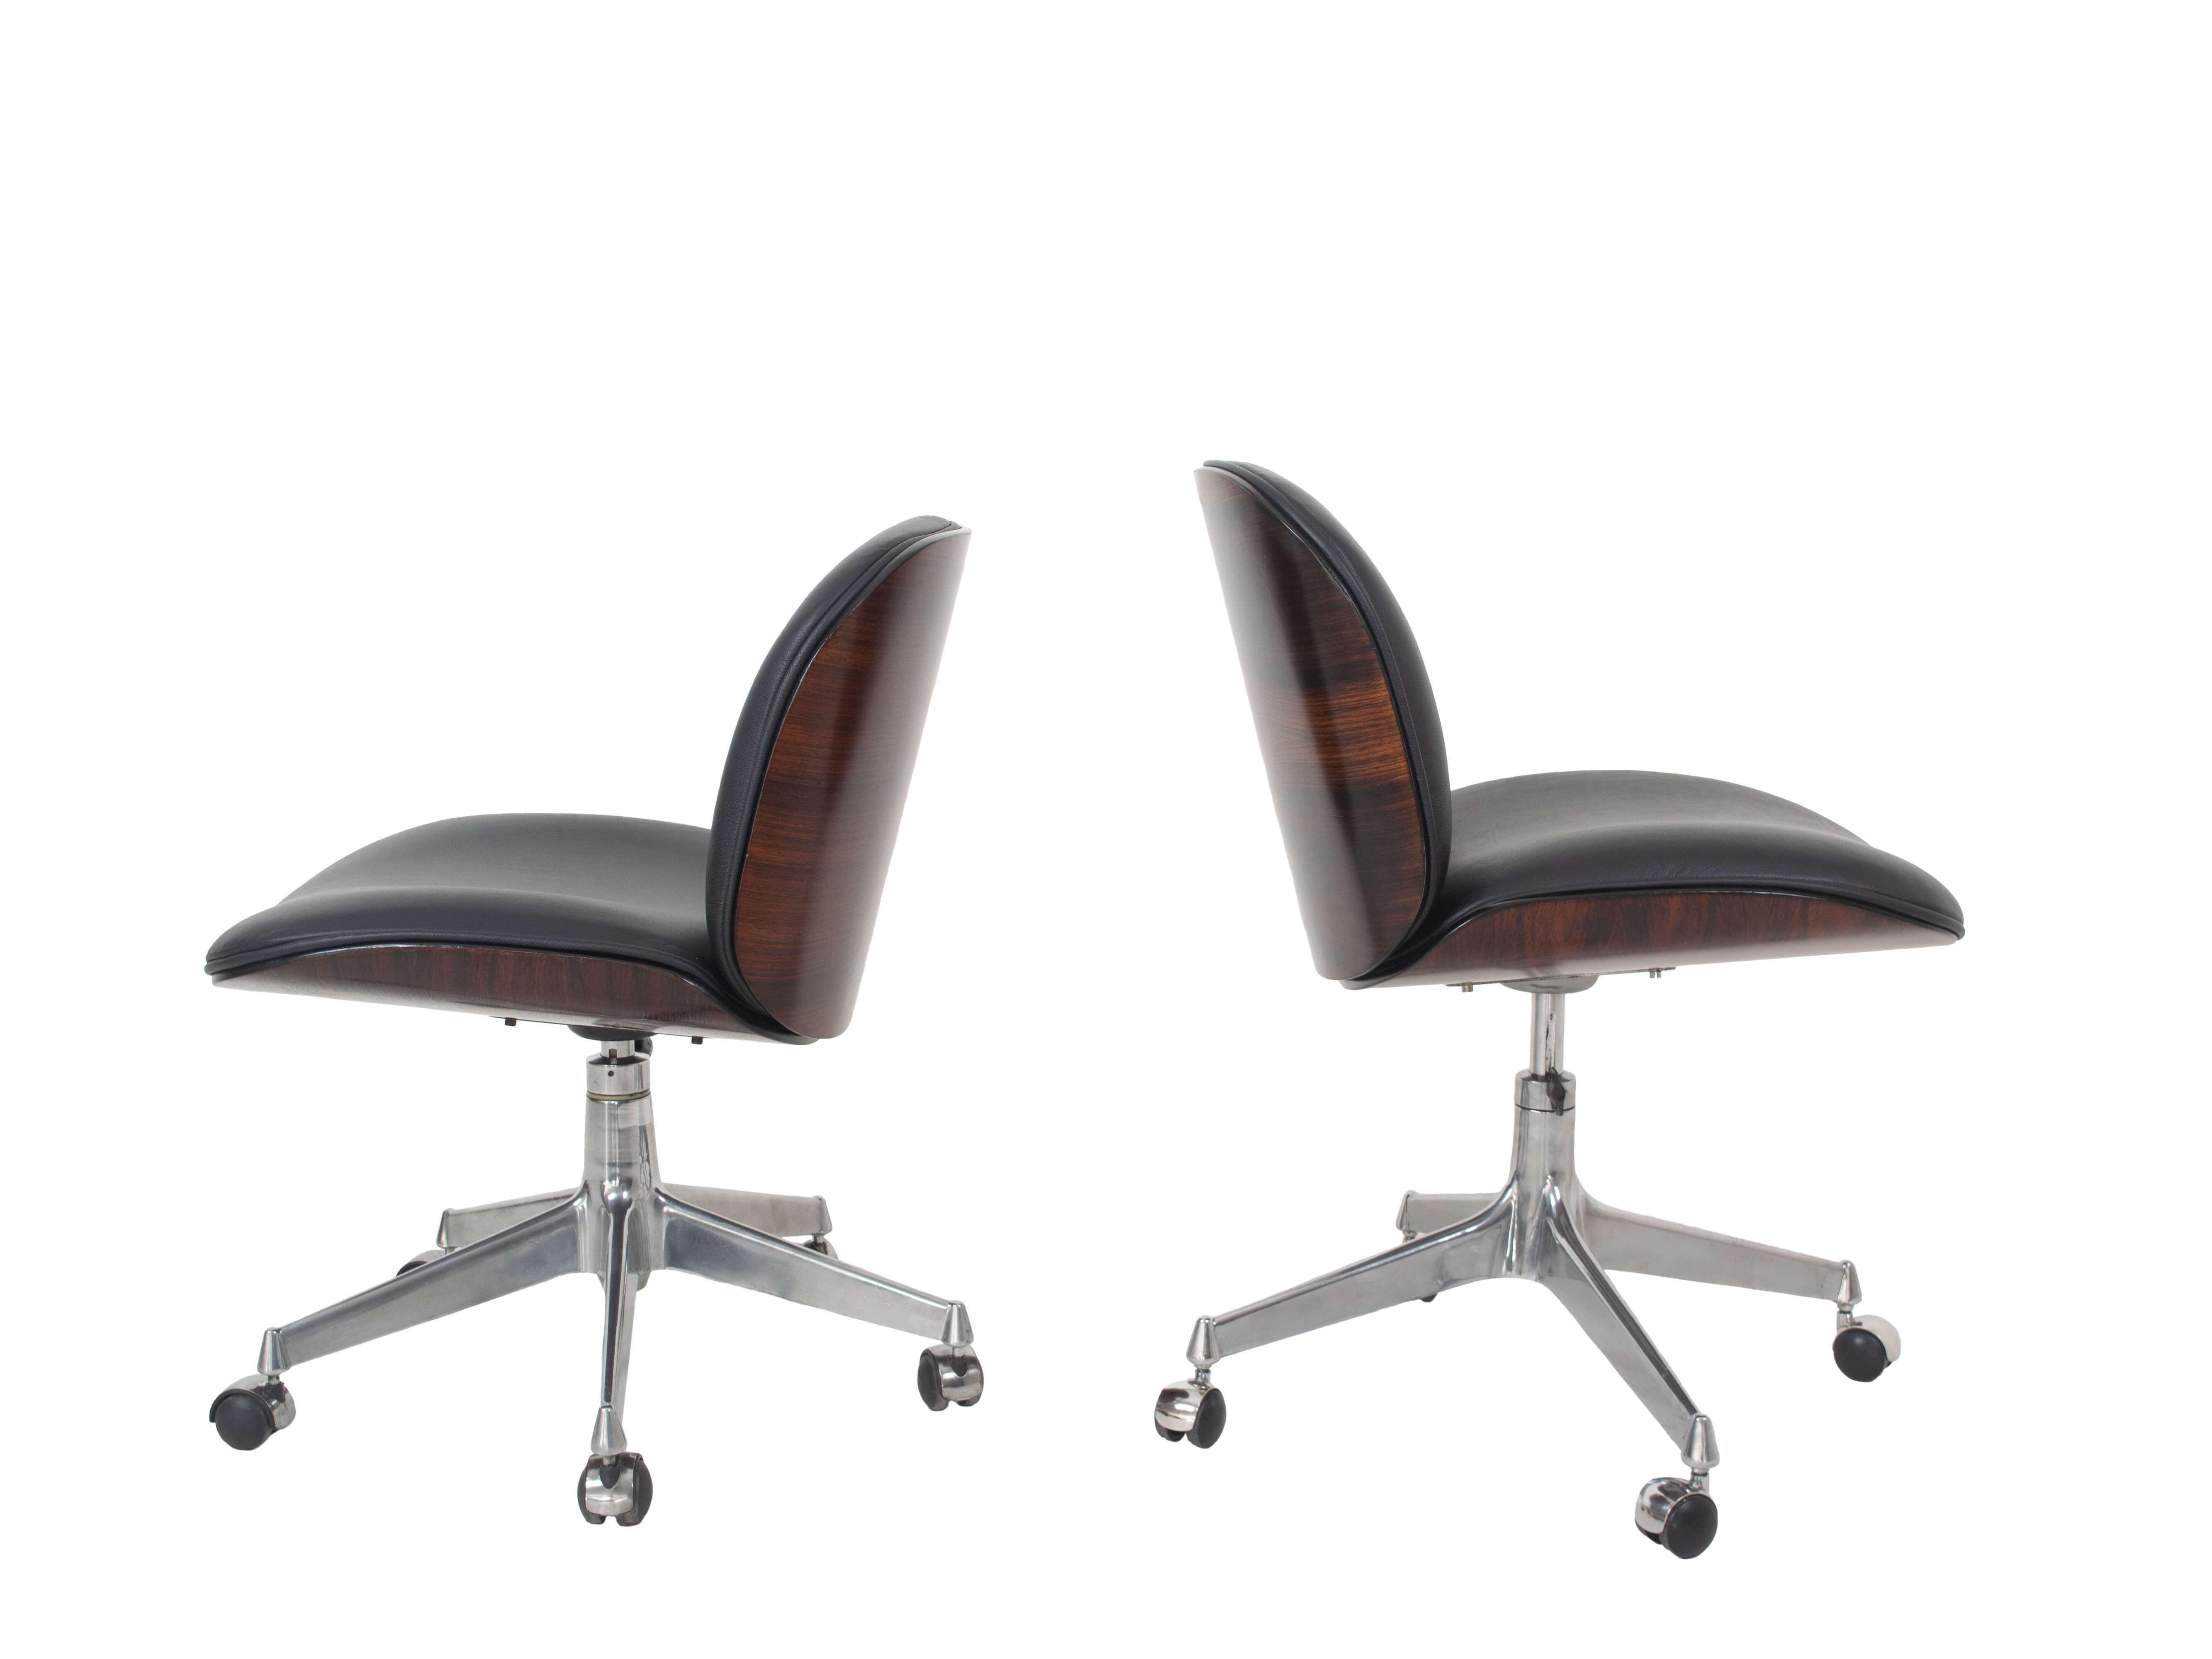 Set of two Ico Parisi desk chairs. Designed by Italian design icon Ico Parisi in 1959 and produced from the 1950s – 1970s for MIM Roma ltd in Italy. These luxury chairs have new high-quality aniline black leather upholstery, beautiful rosewood